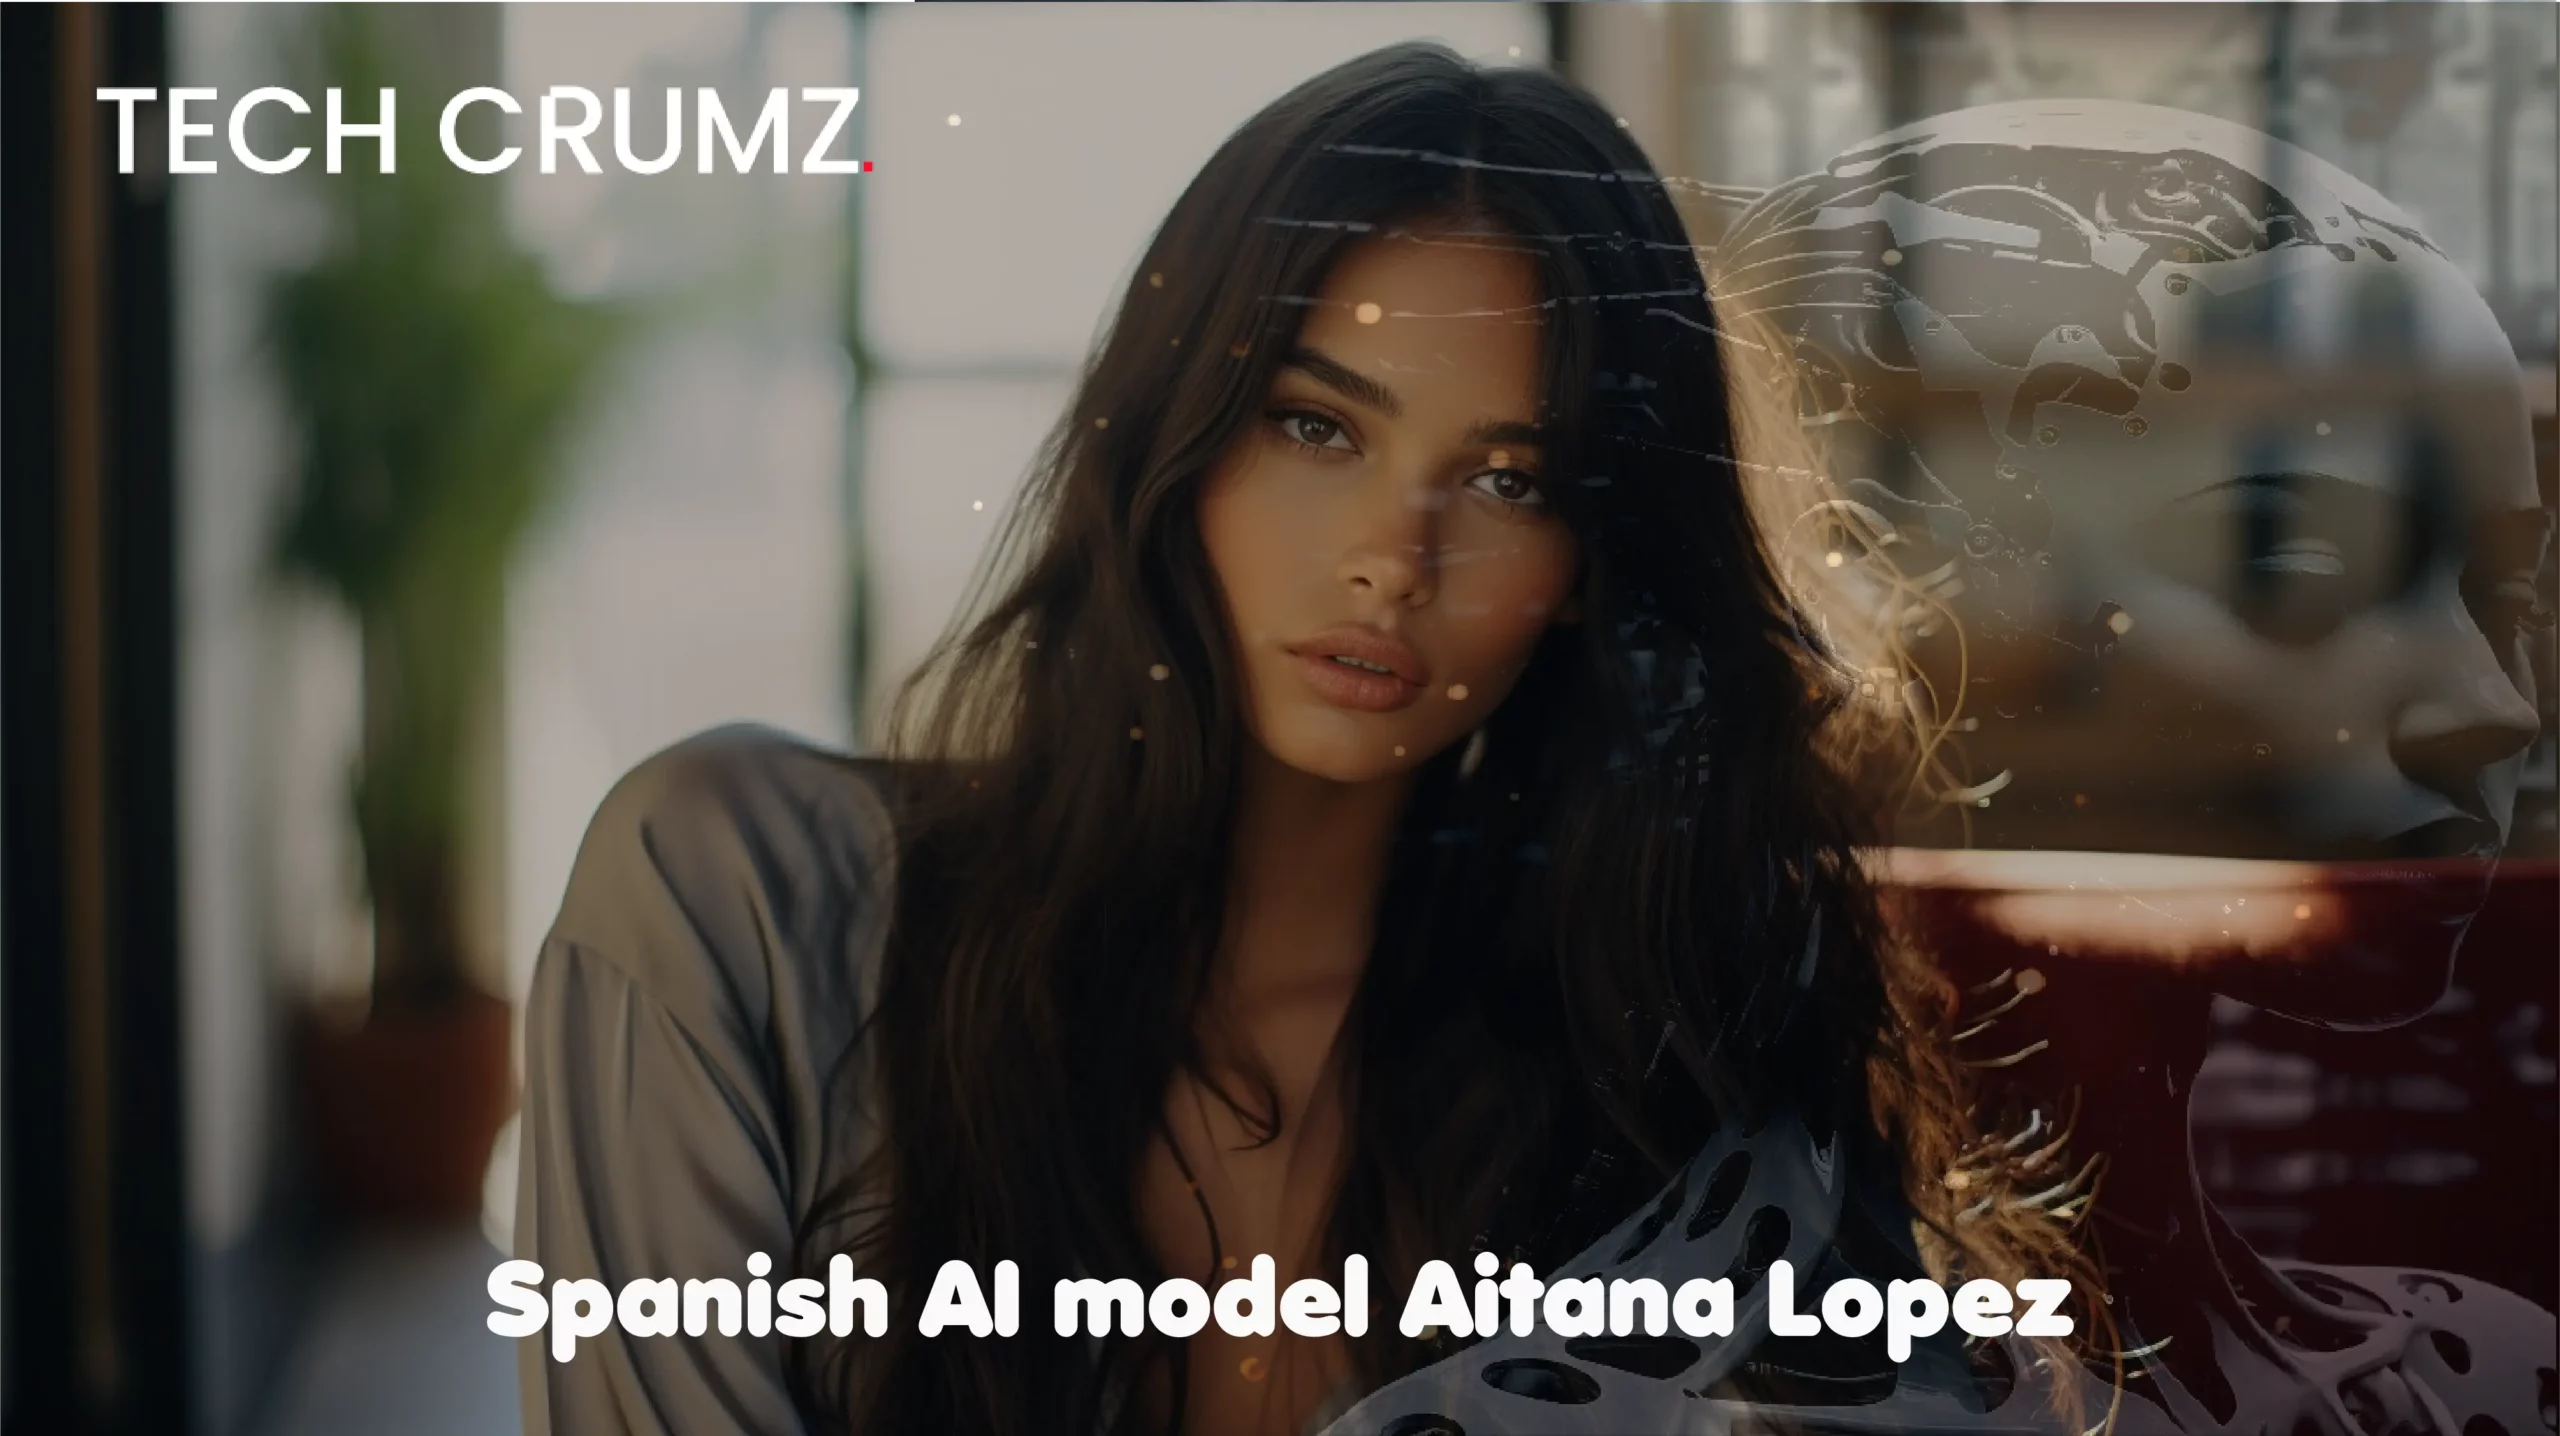 Model created by AI earns up to R$50,000 per month in Spain